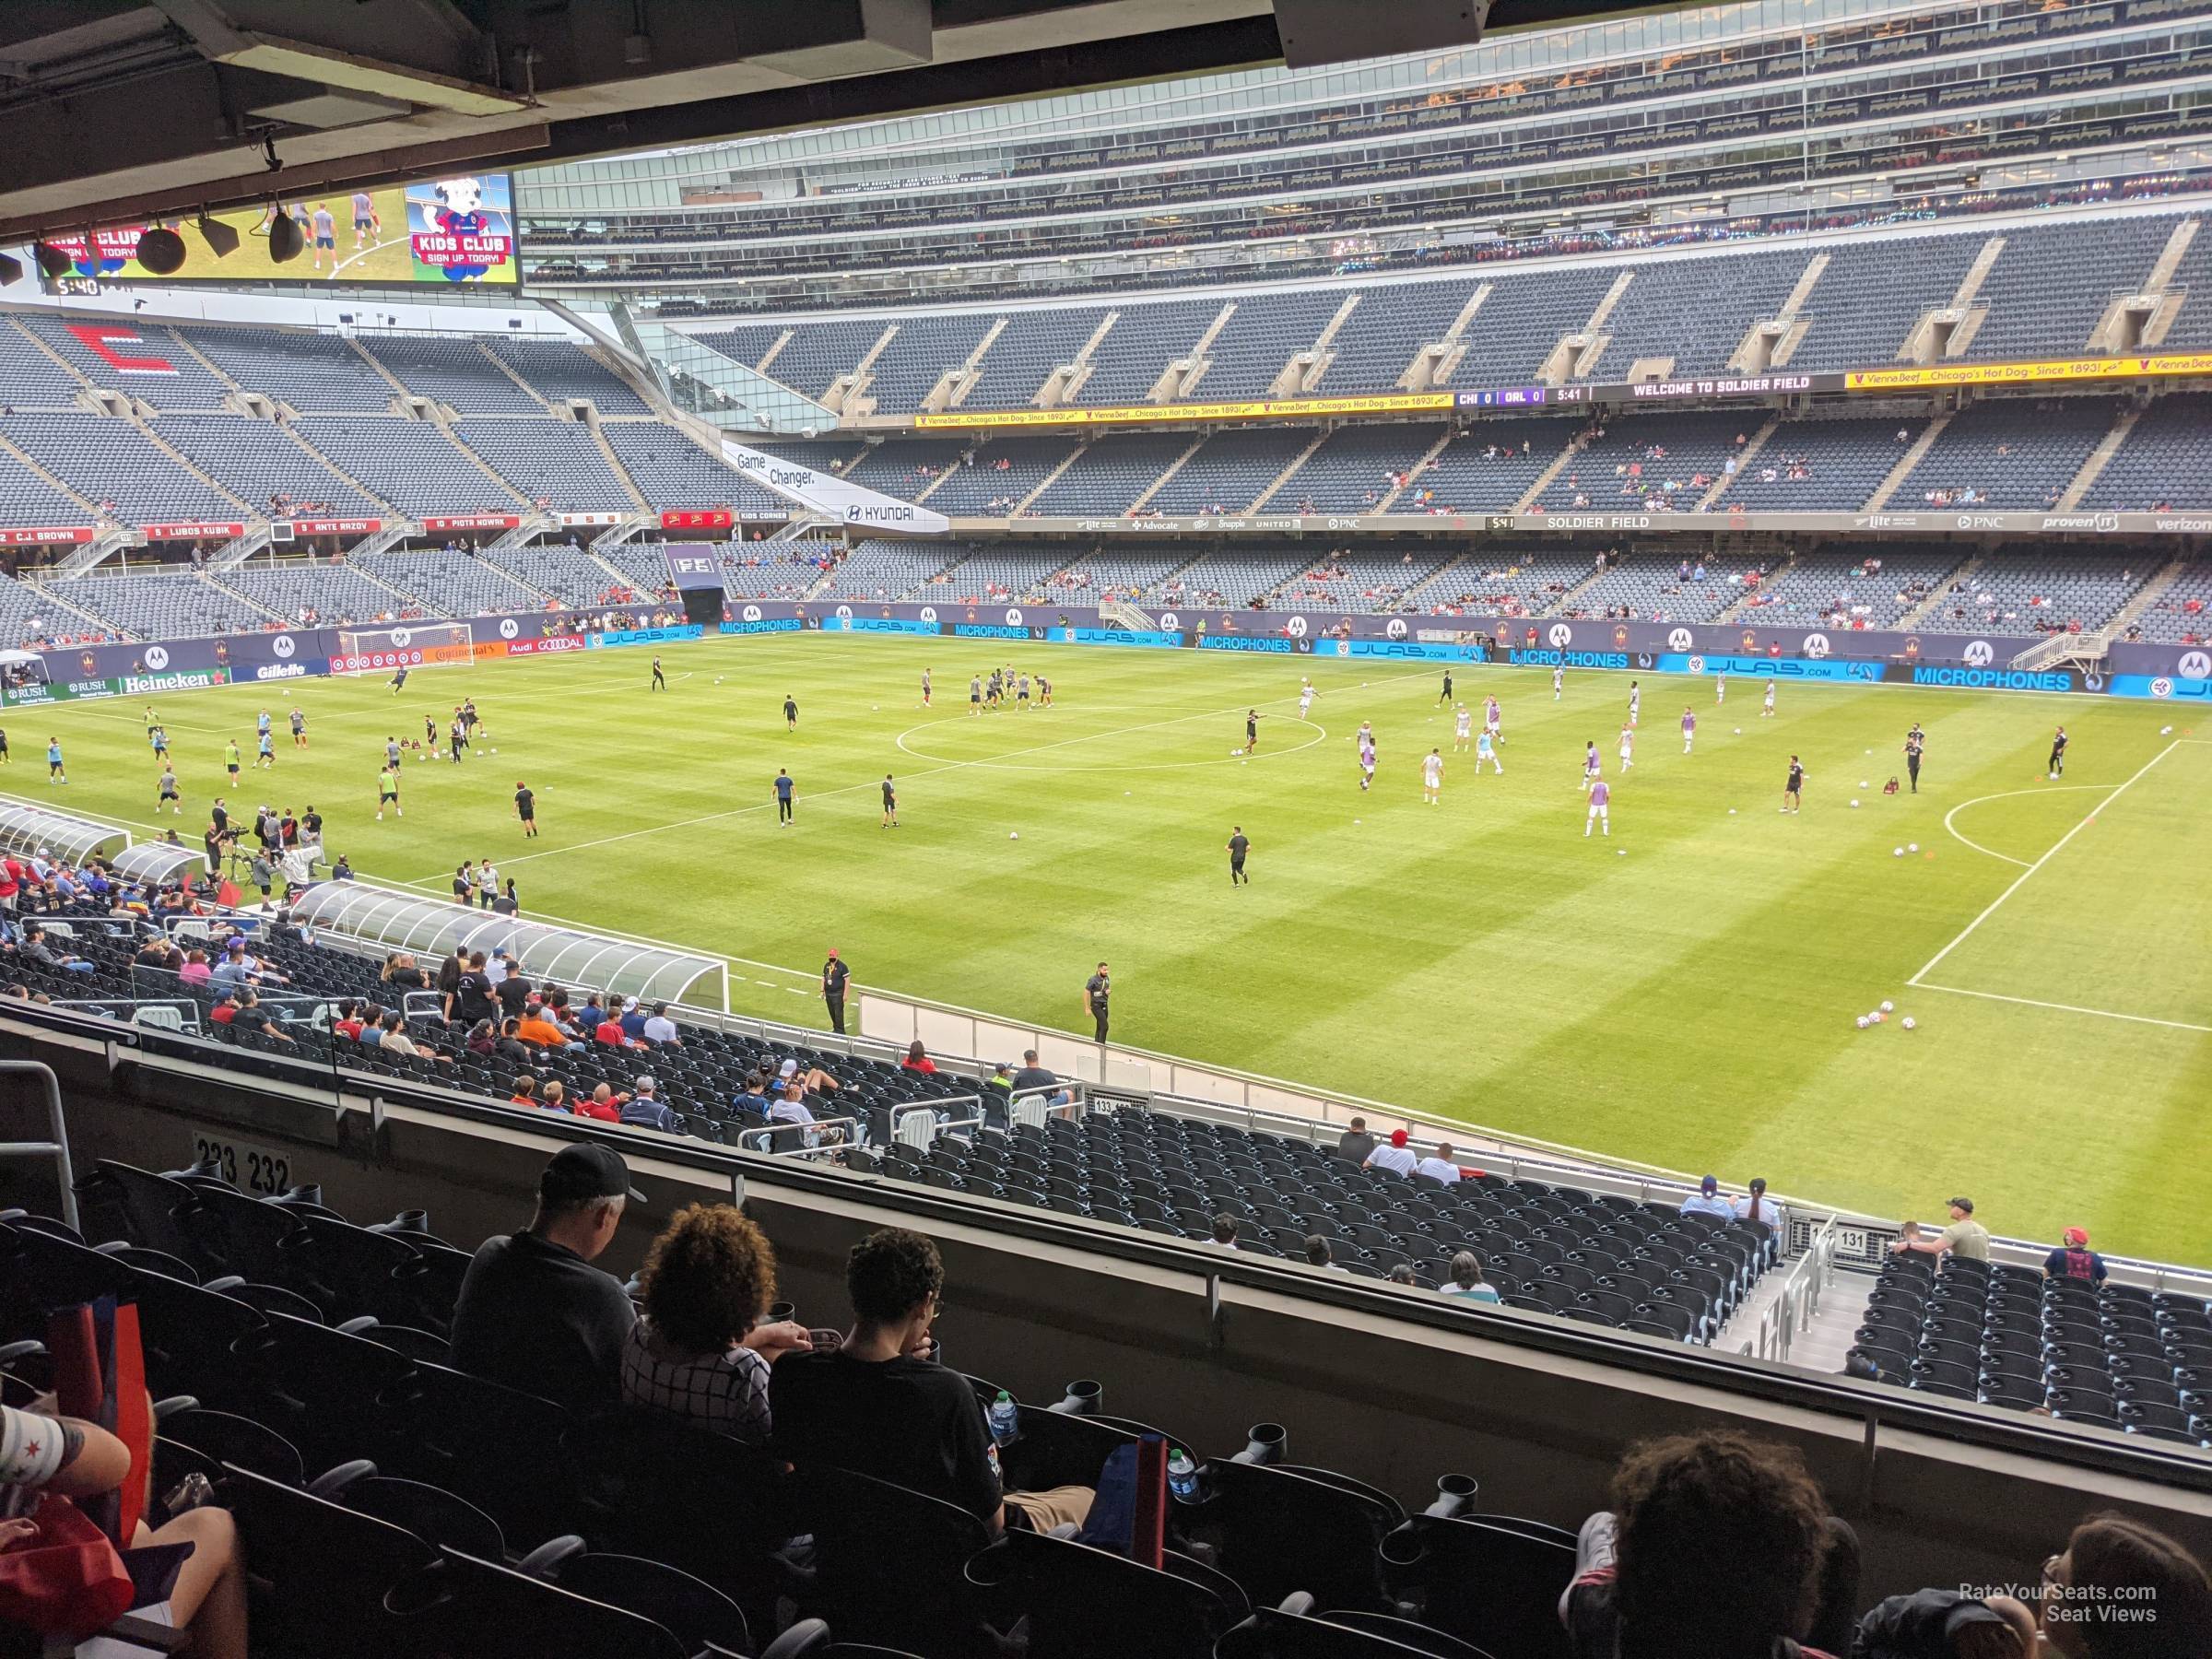 section 232, row 6 seat view  for soccer - soldier field